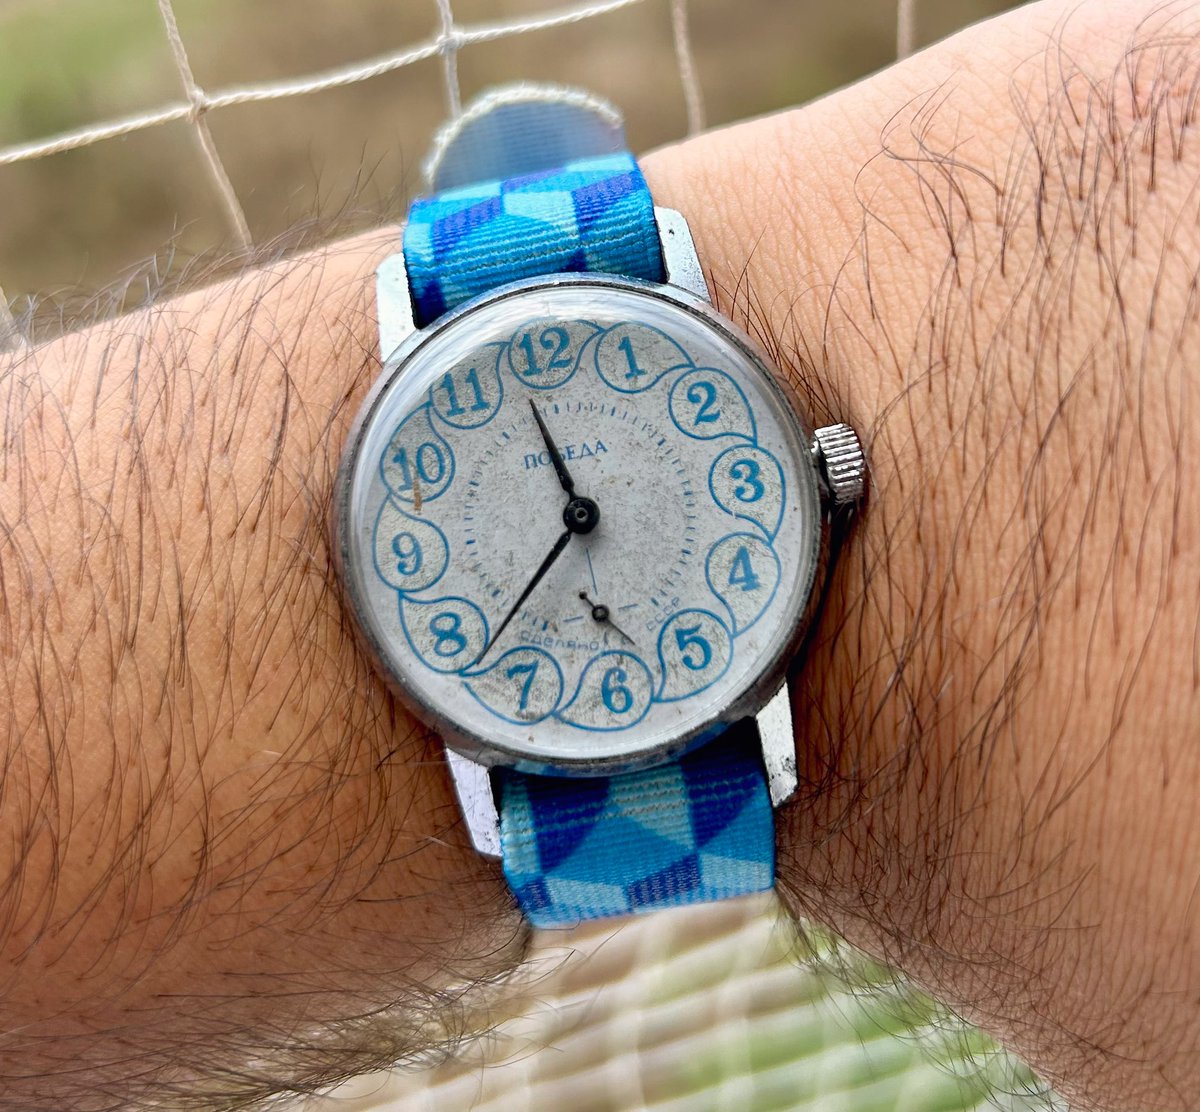 After a long time wearing this vintage Russian beauty is on my wrist.
#pobeda #vintagewatches #VintageCollectibles